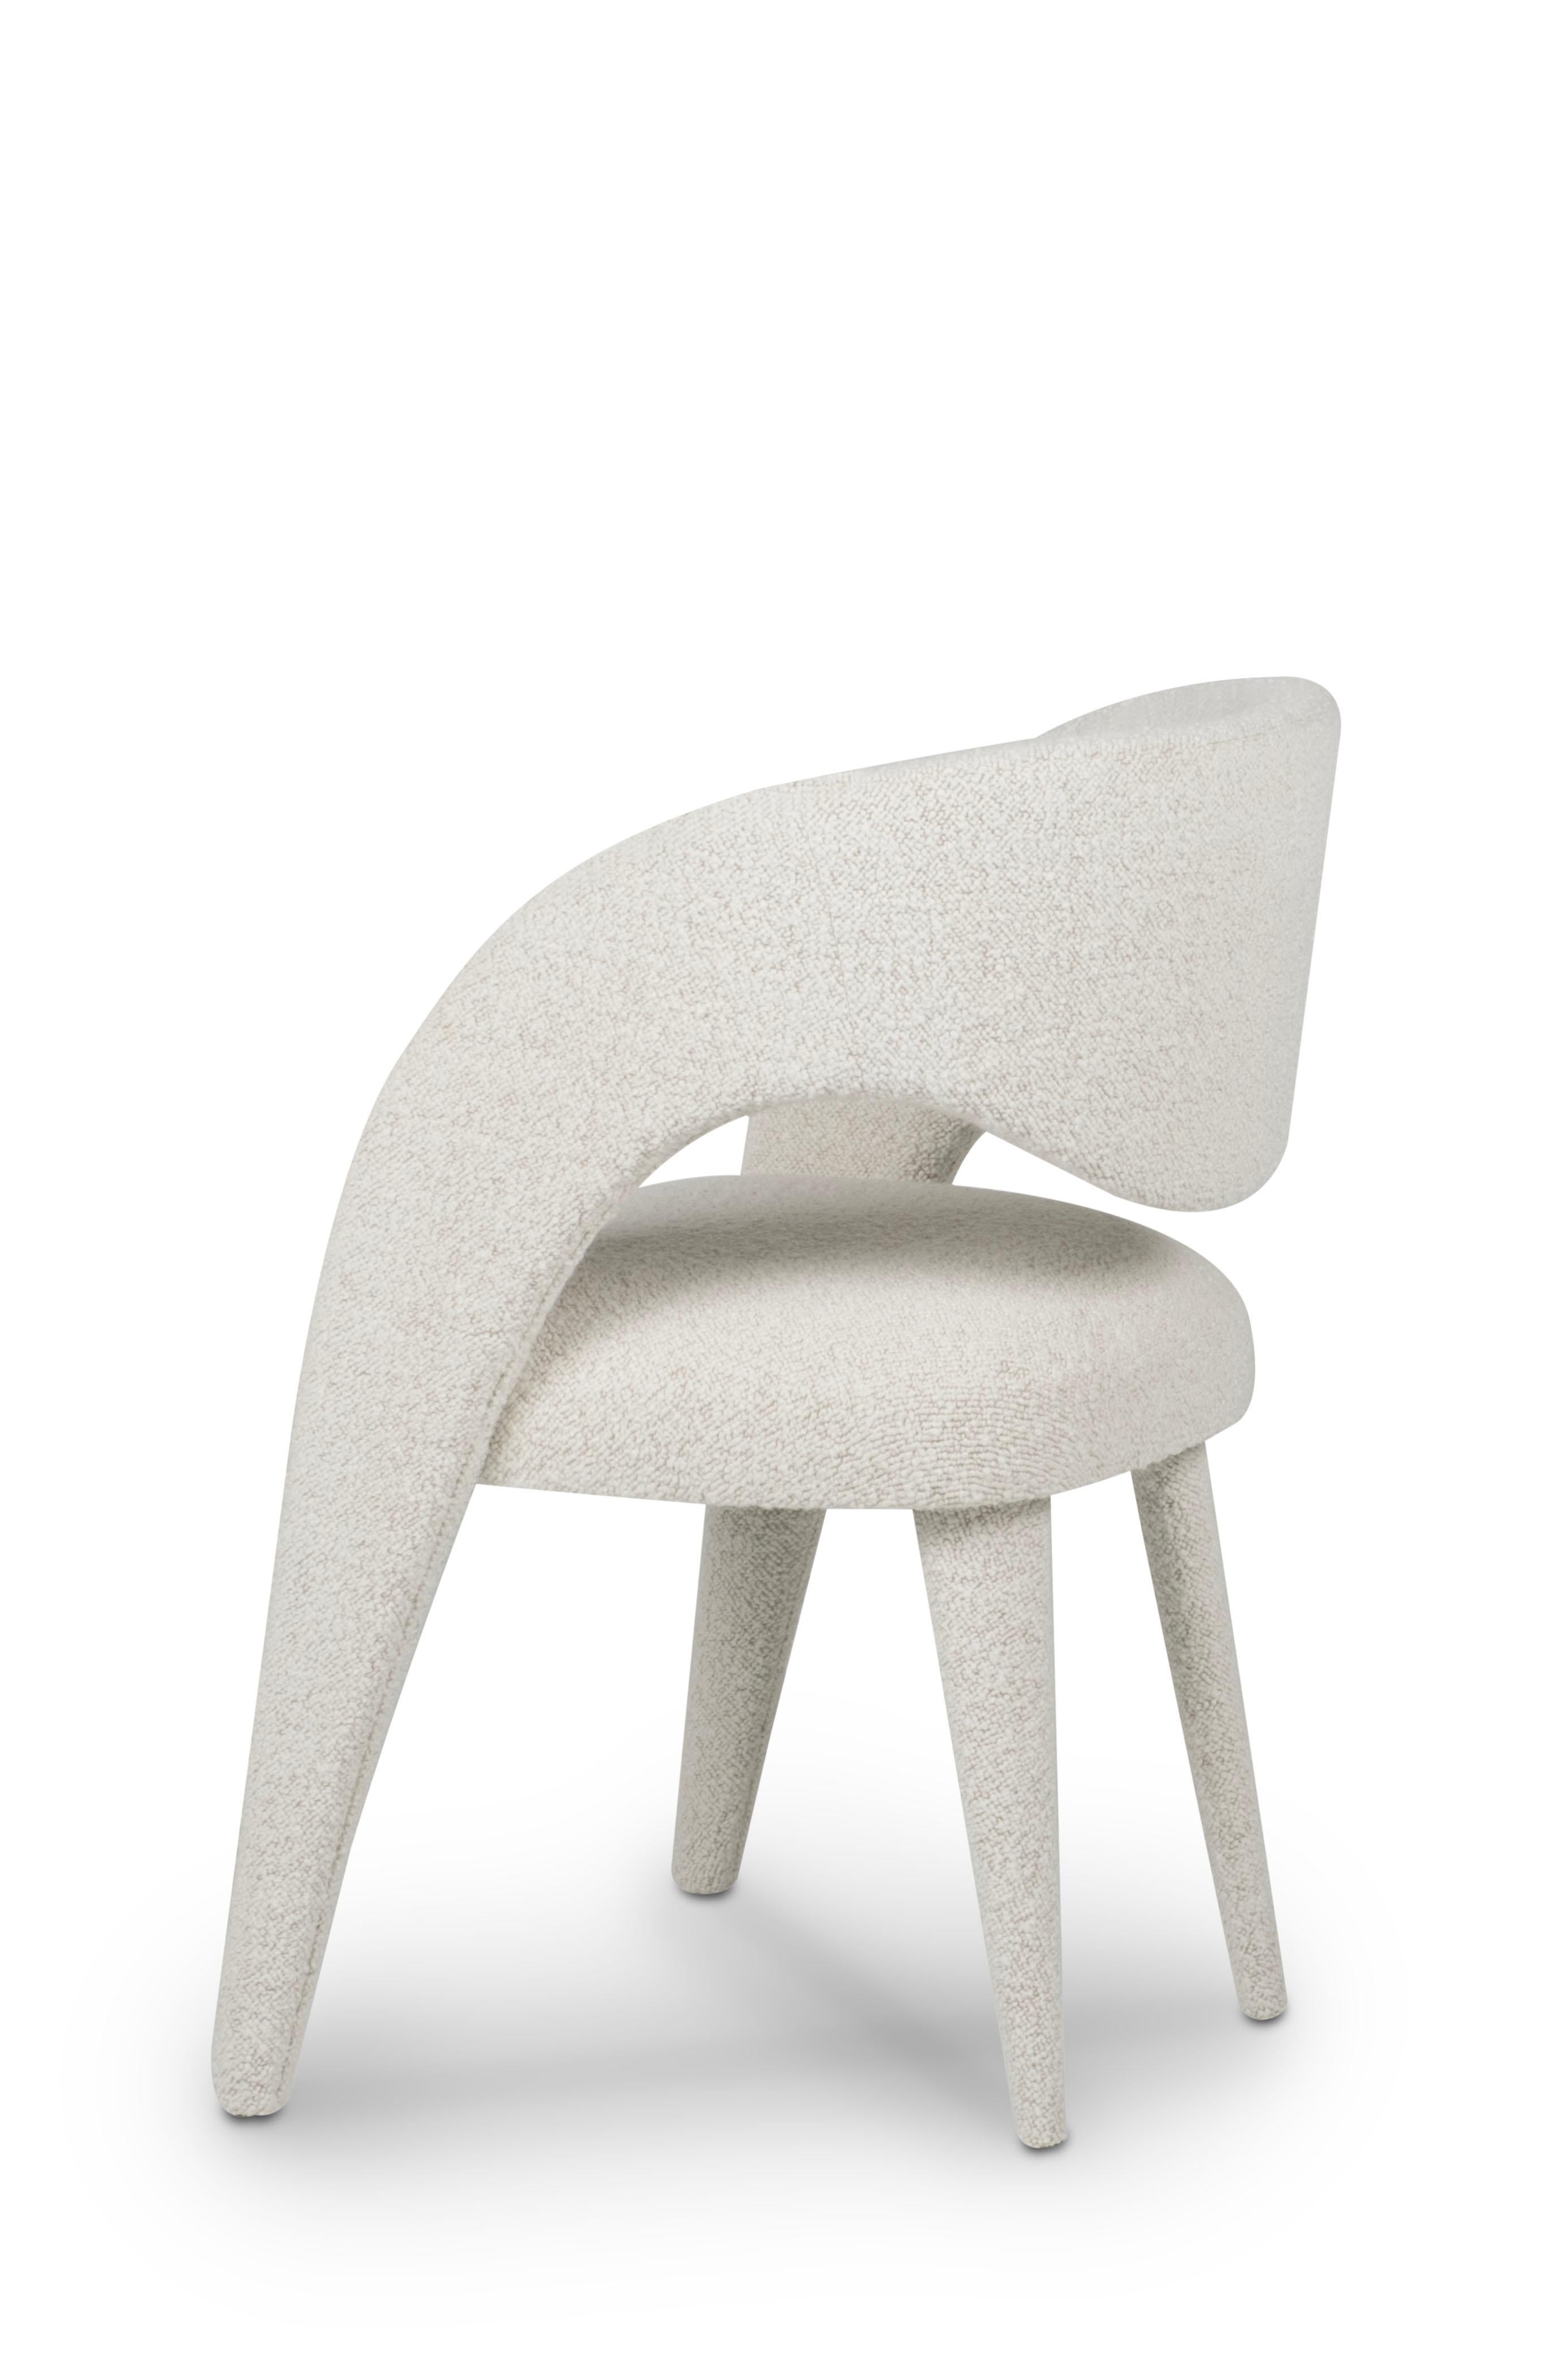 Hand-Crafted Modern Laurence Dining Chairs, DEDAR Bouclé, Handmade in Portugal by Greenapple For Sale